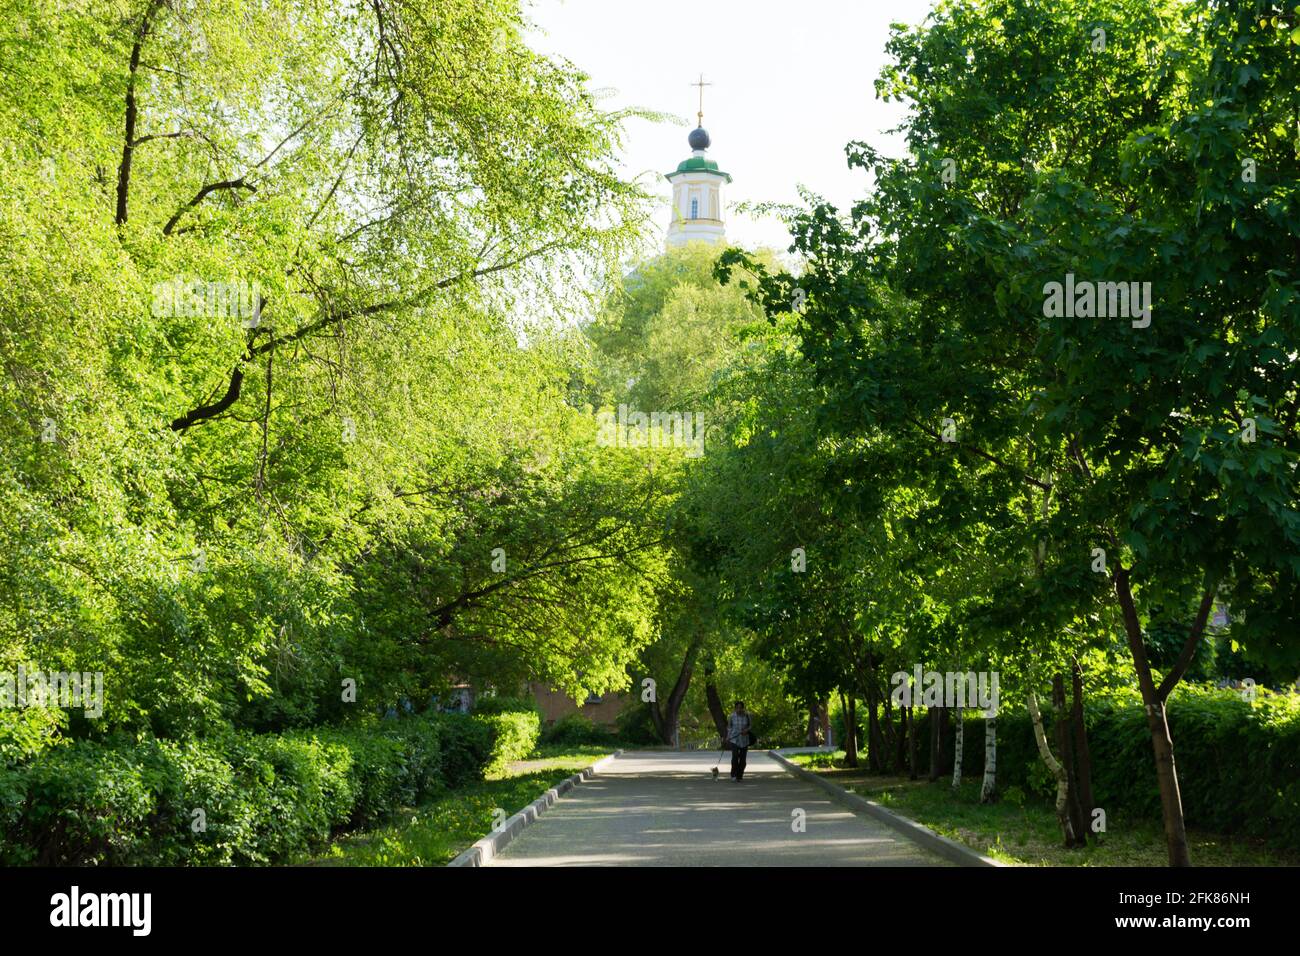 Voronezh Russia May 08 2019. The dome of the Resurrection Church on Ordzhonikidze Street among the green trees of the pedestrian alley. A woman walks Stock Photo